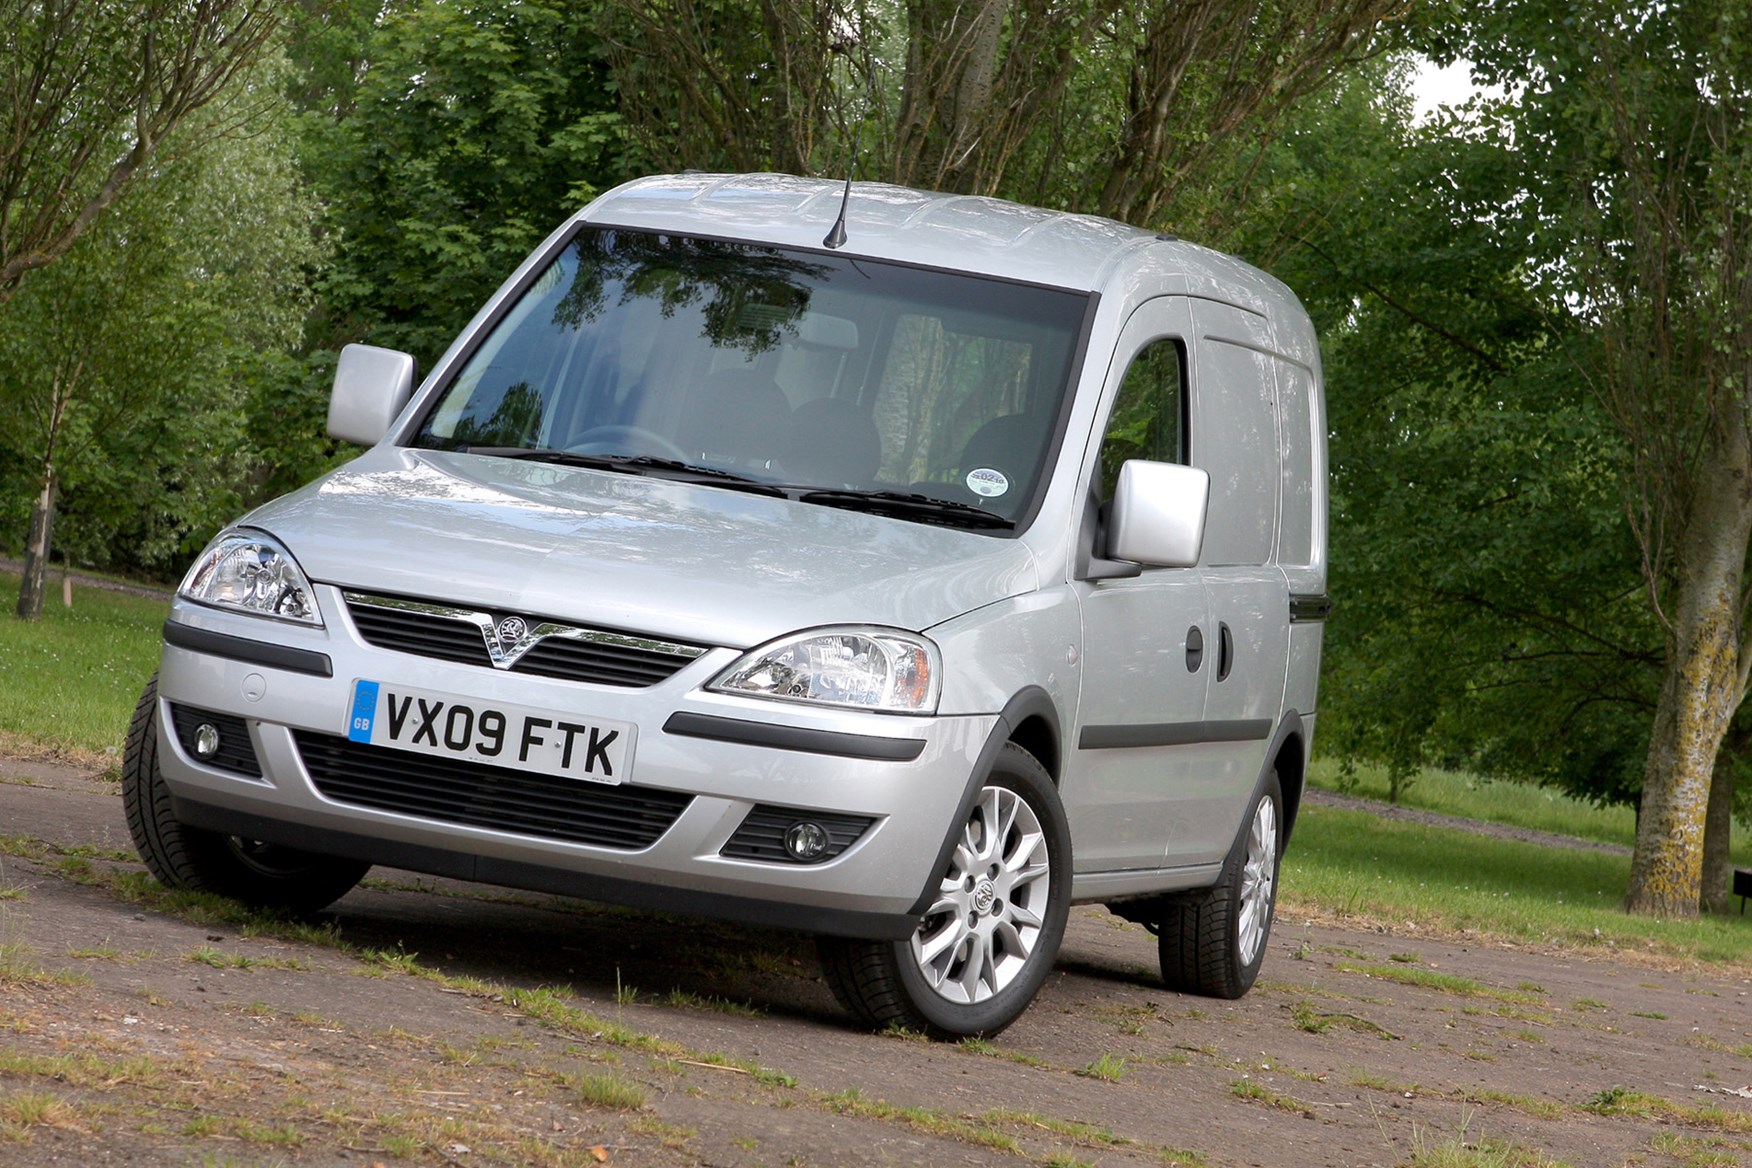 Vauxhall Combo review on Parkers Vans - exterior